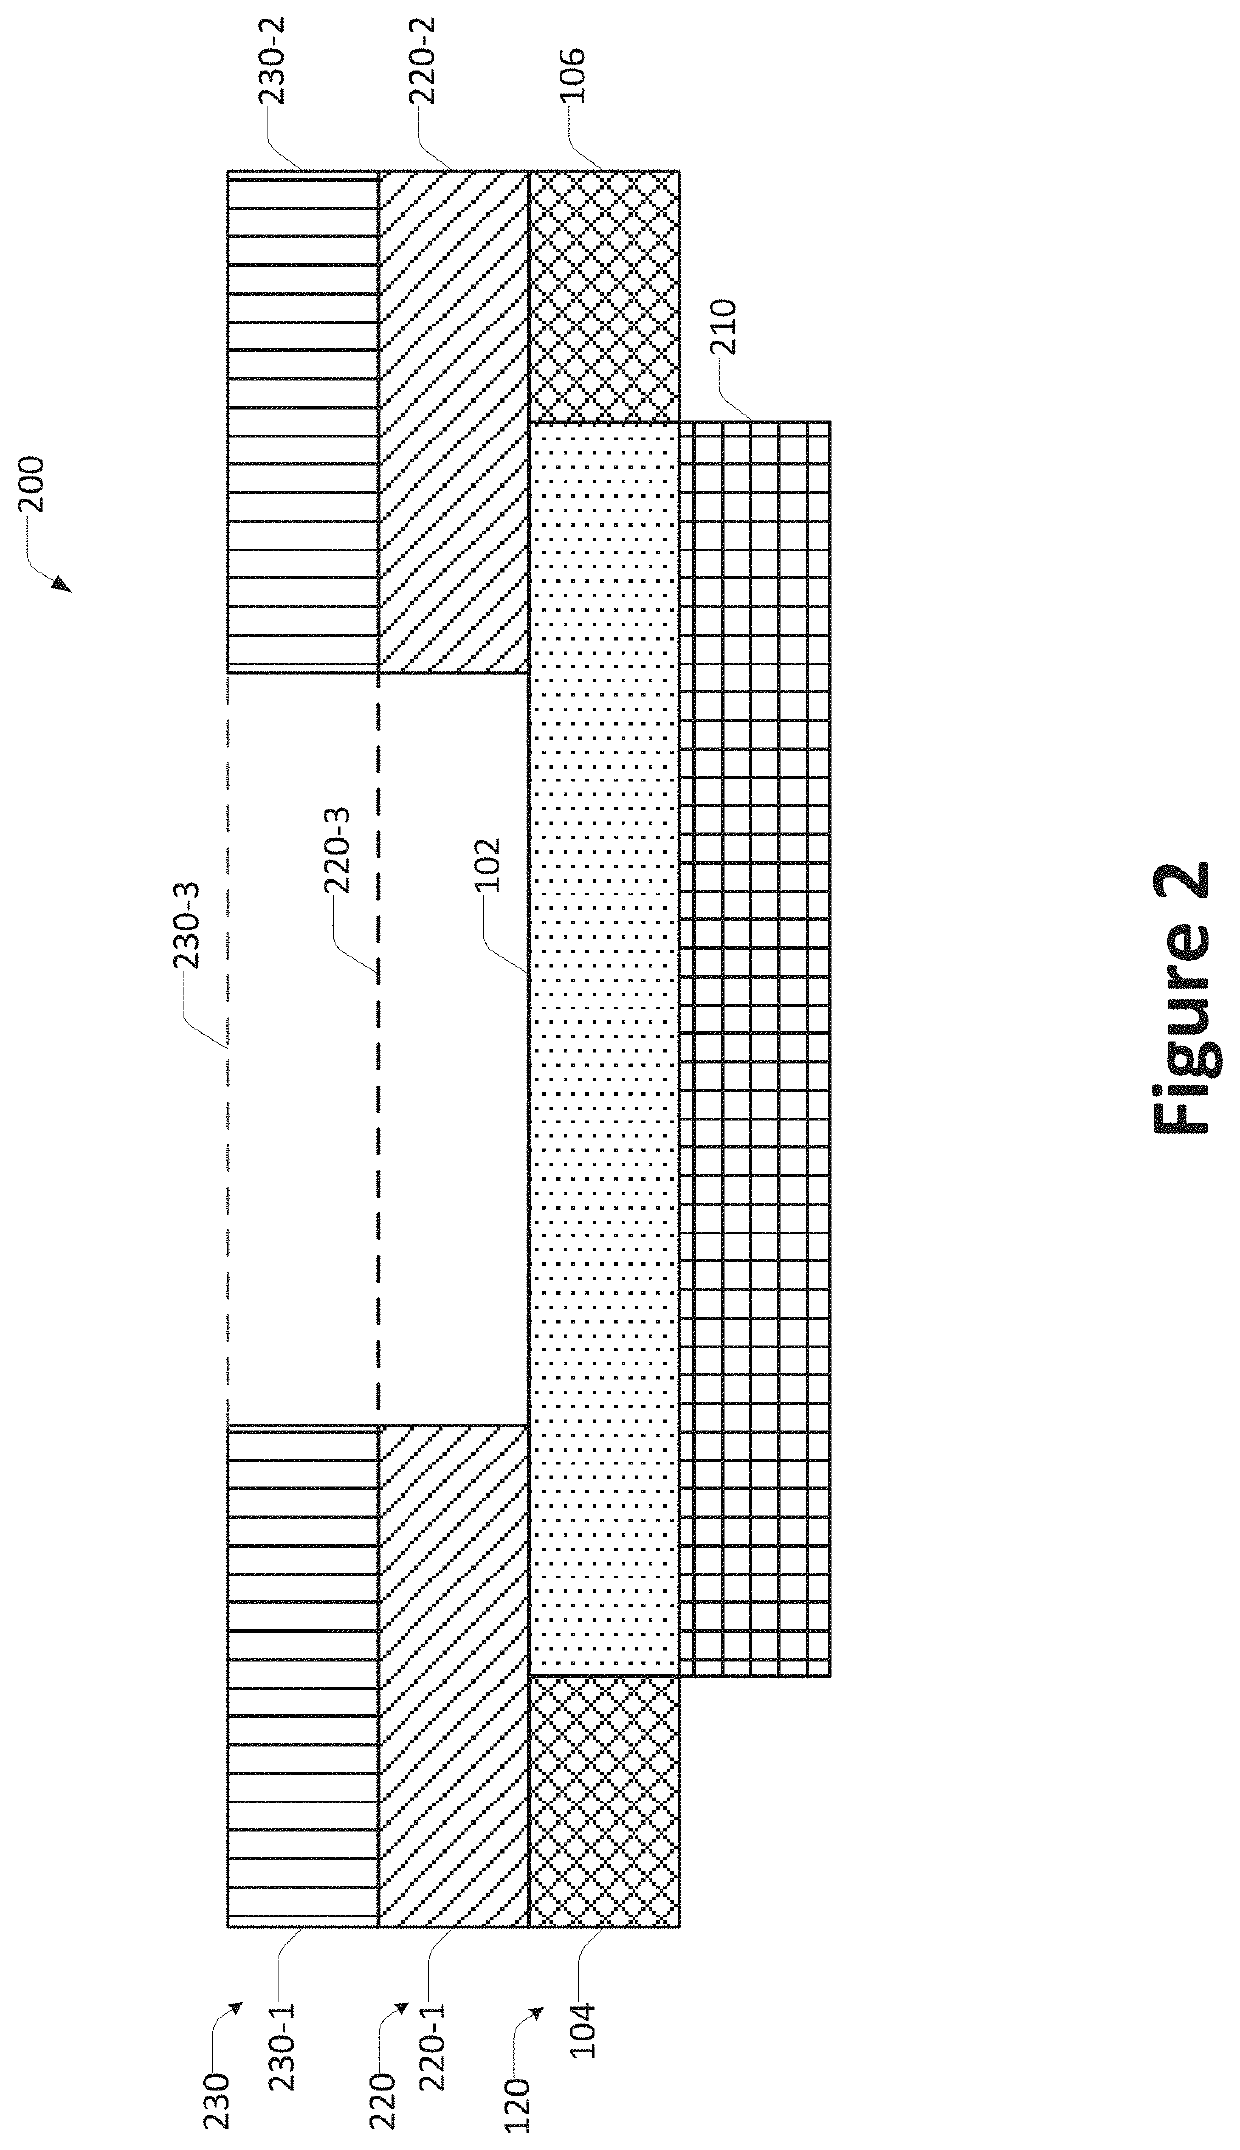 Display system with extended display area